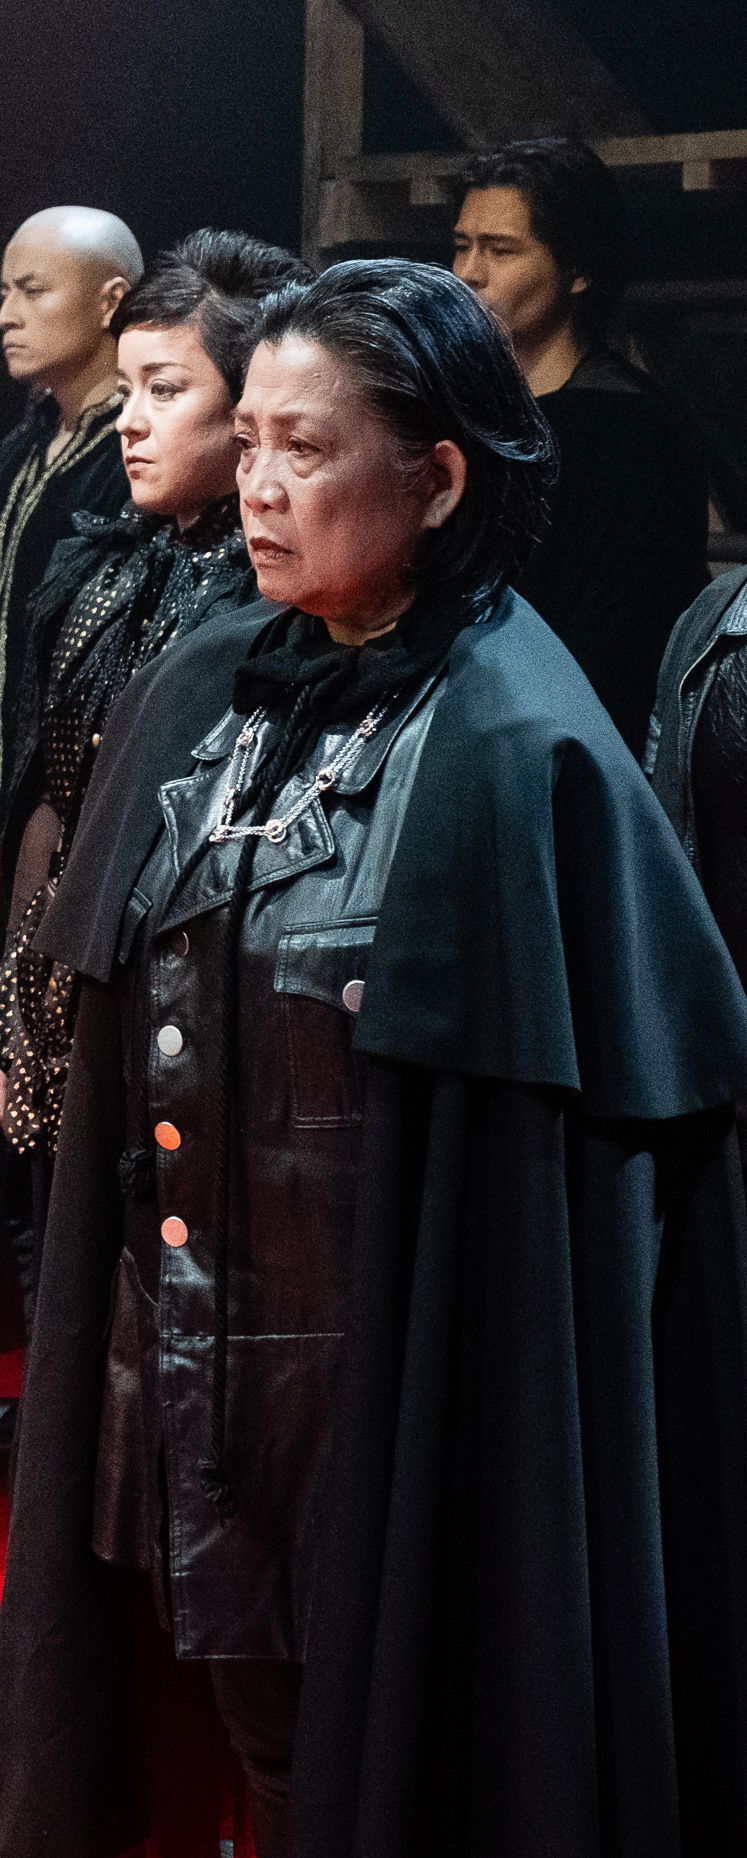 Mia Katigbak, an Asian American woman with combed back shoulder-length black hair, stands on stage and gazes forward with other actors. She wears a collared black leather top under a dramatic black cape.